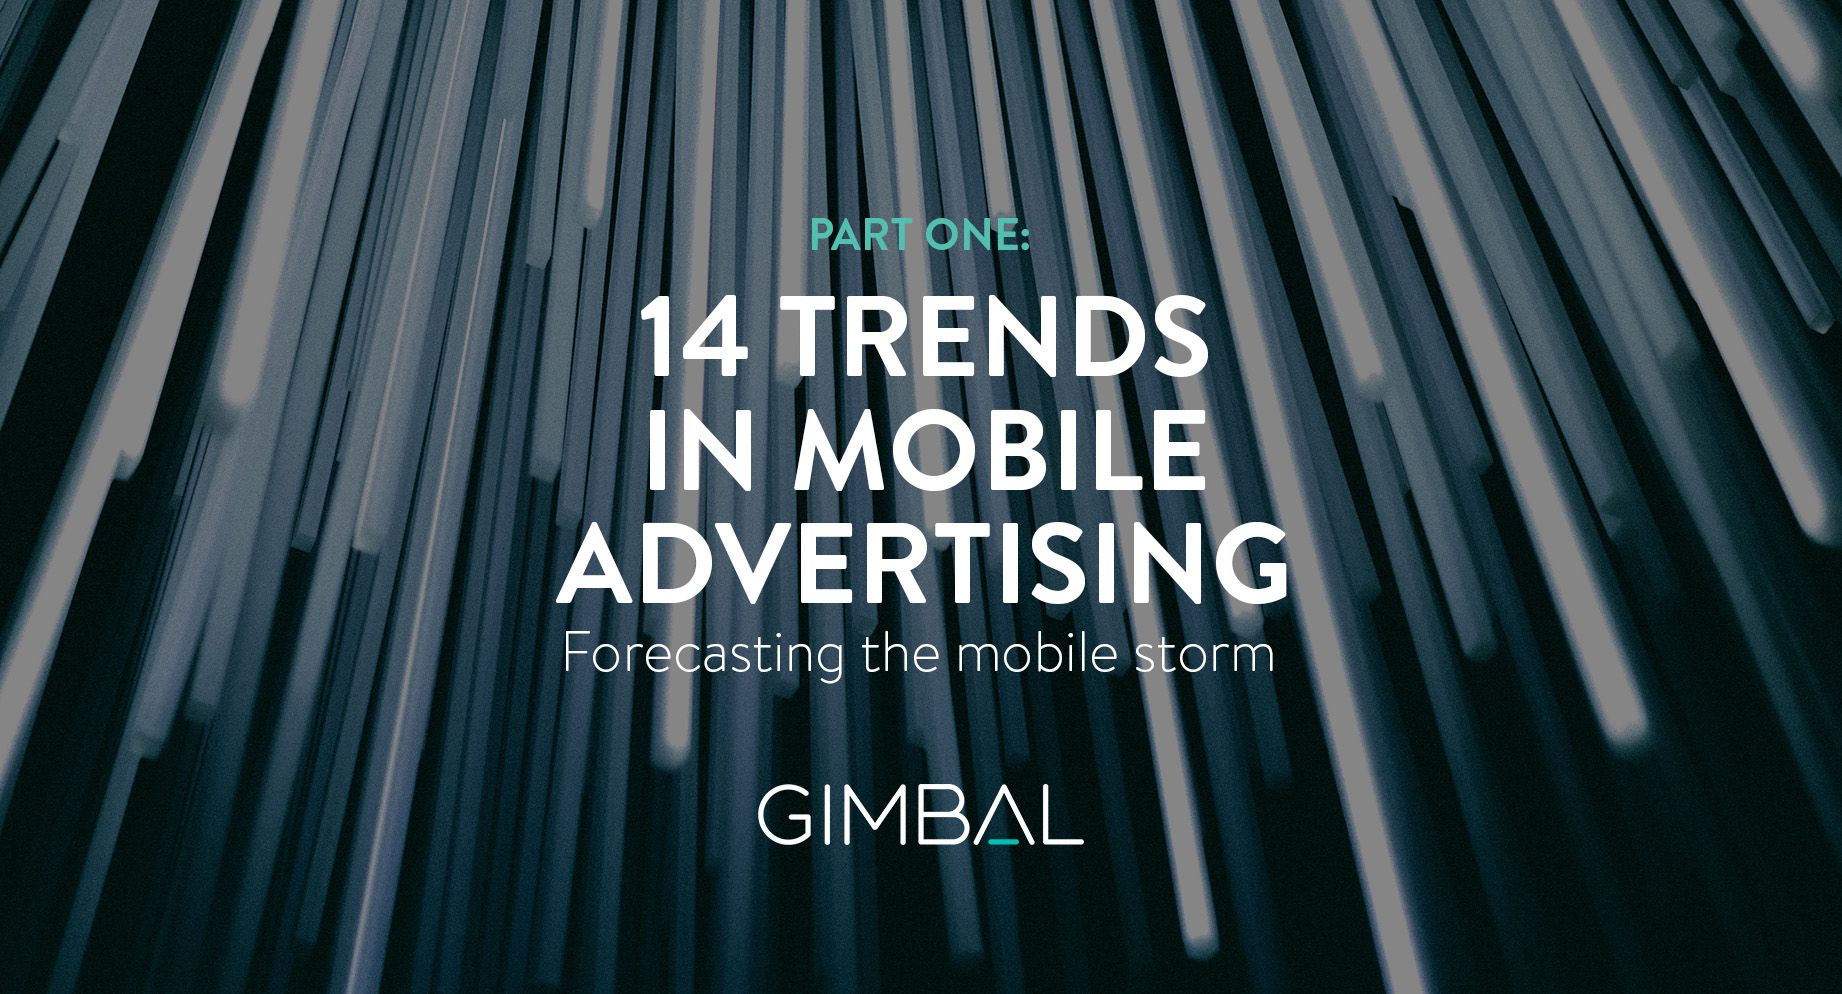 14 Trends in Mobile: Part 1